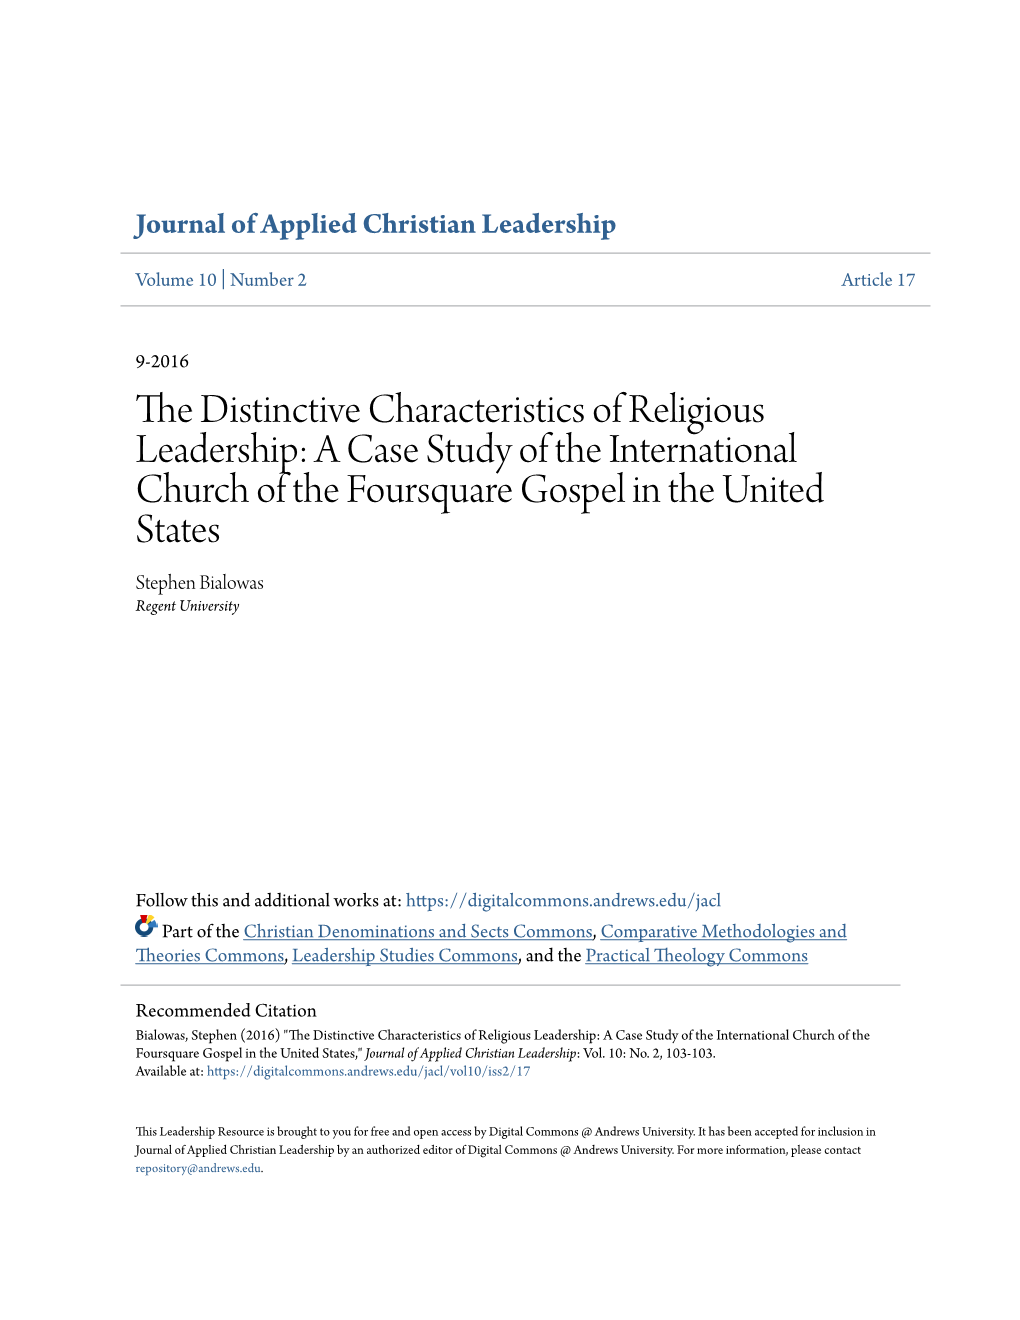 A Case Study of the International Church of the Foursquare Gospel in the United States Stephen Bialowas Regent University